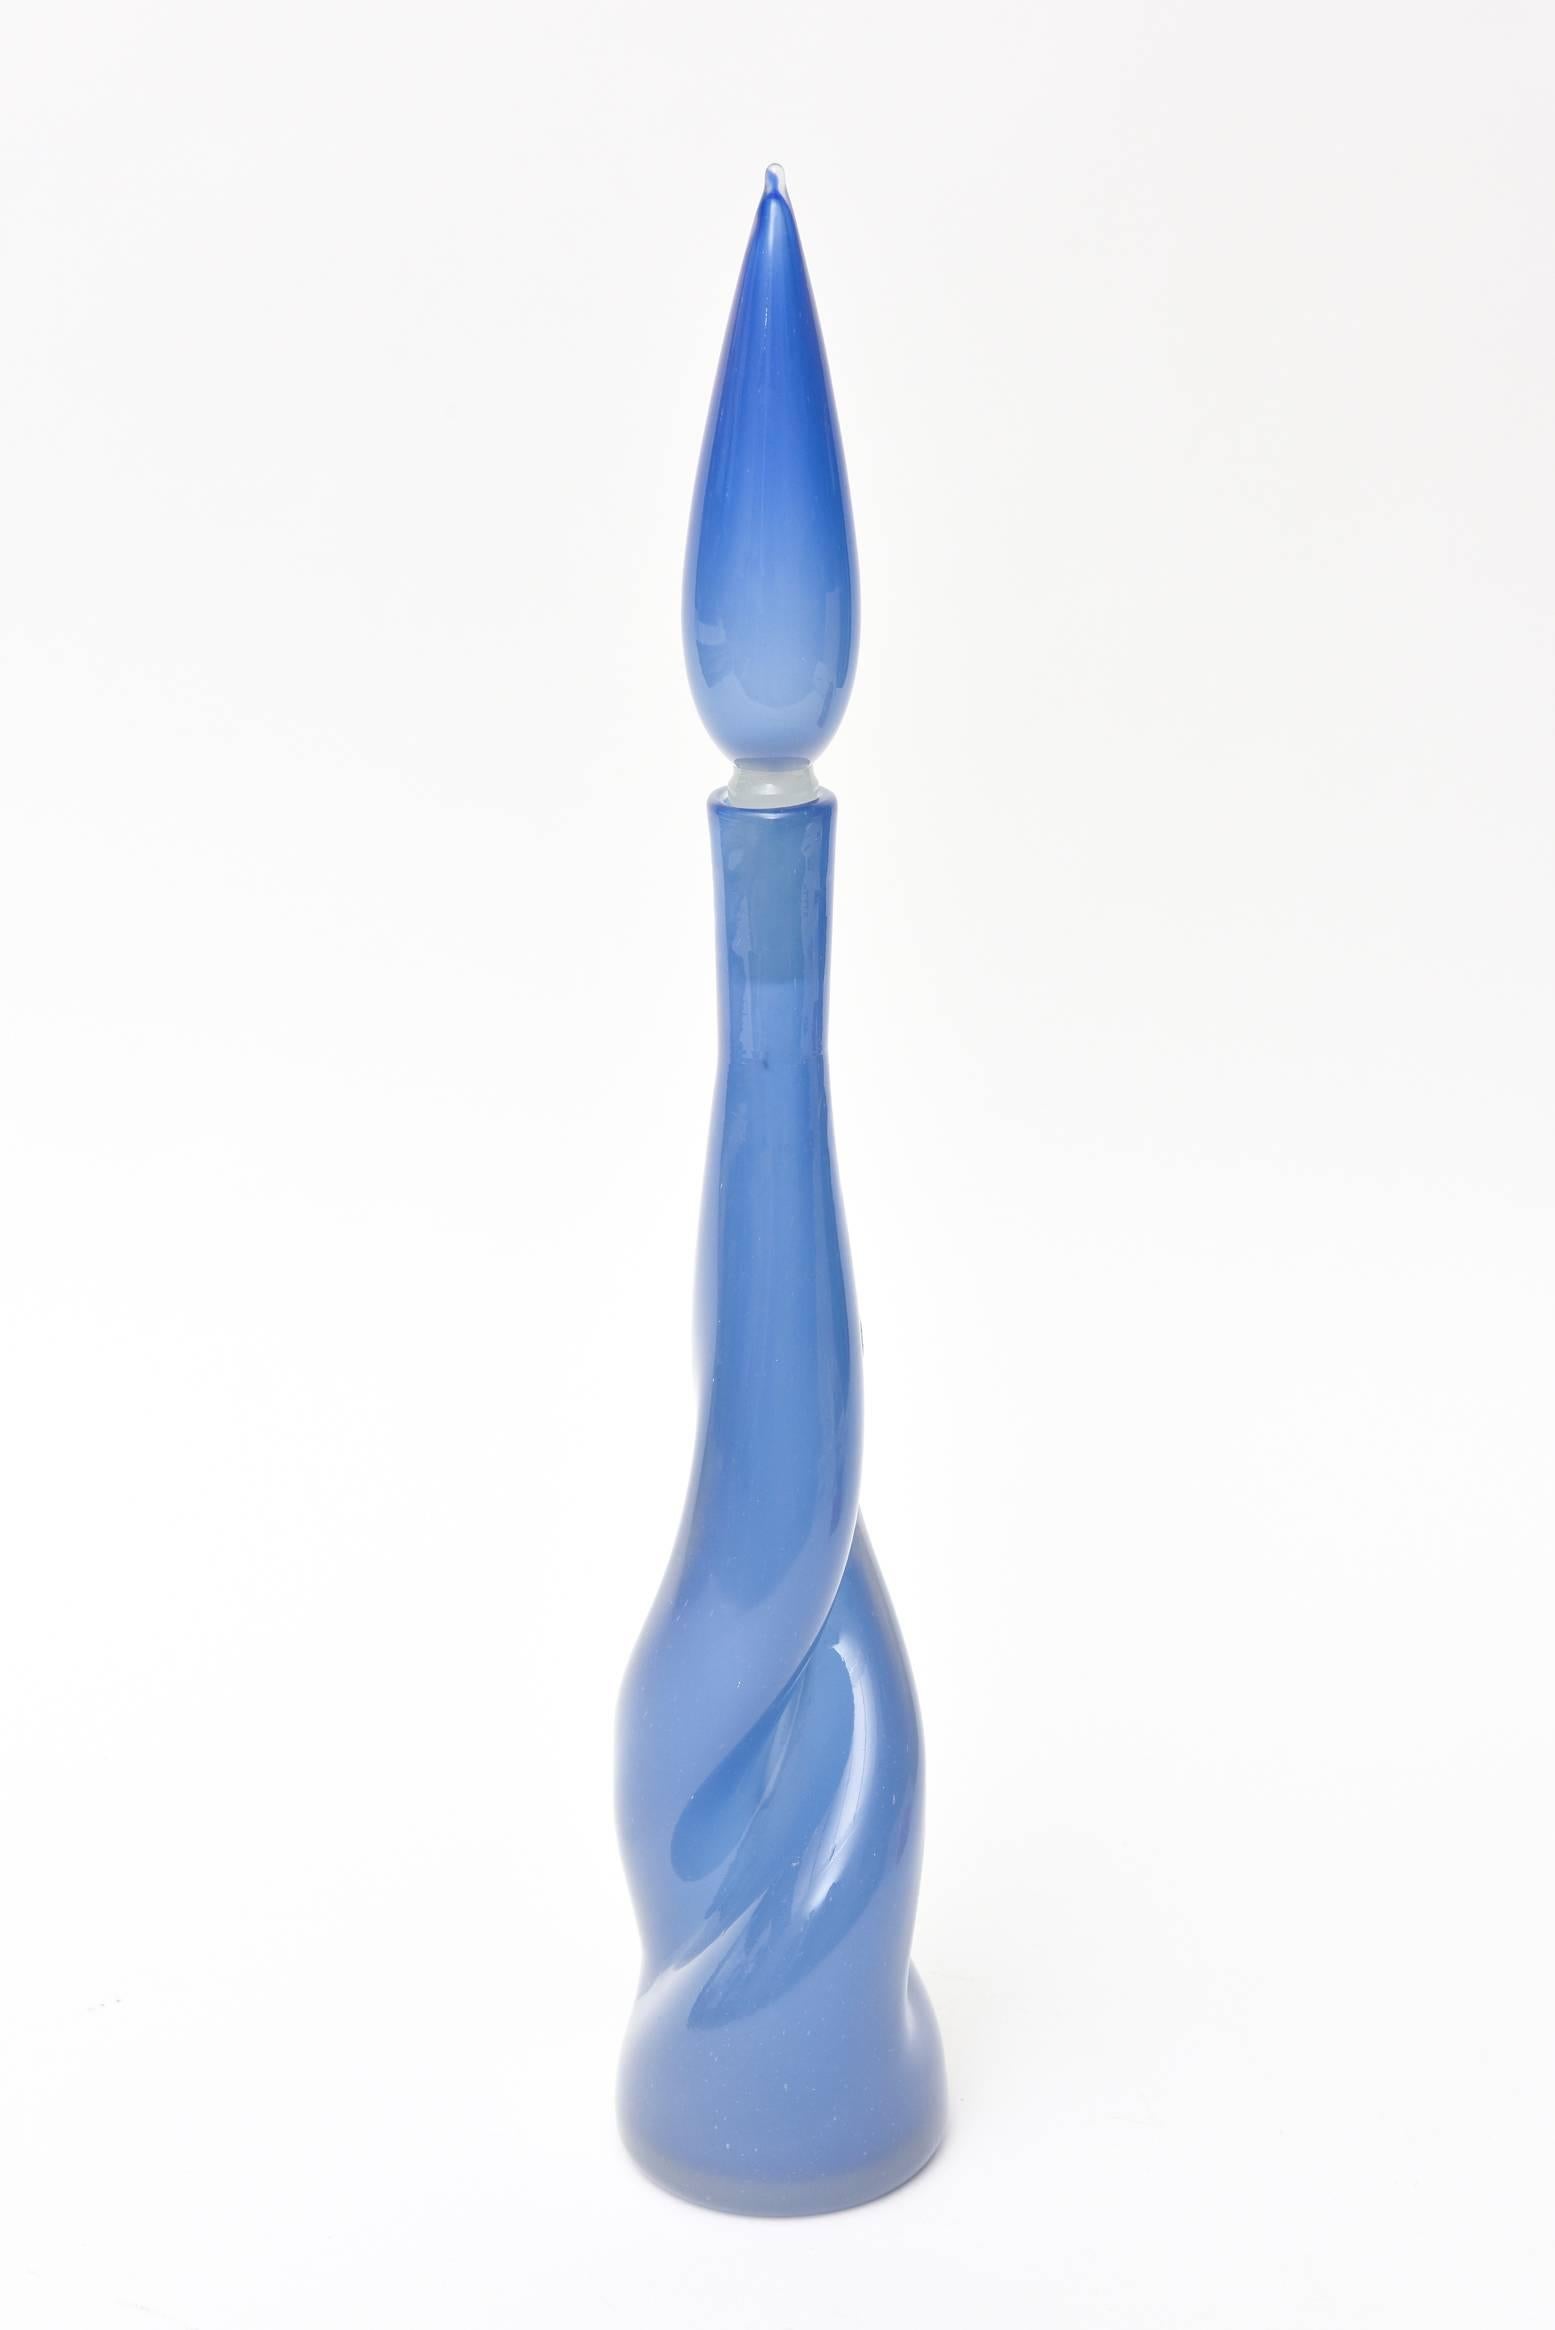 This stunning Italian Murano Archimede Seguso midcentury handblown glass bottle is a most unusual color of periwinkle blue. The hues of periwinkle blue graduate in color and saturation with other forms of blue. It has a twisted sensual form towards